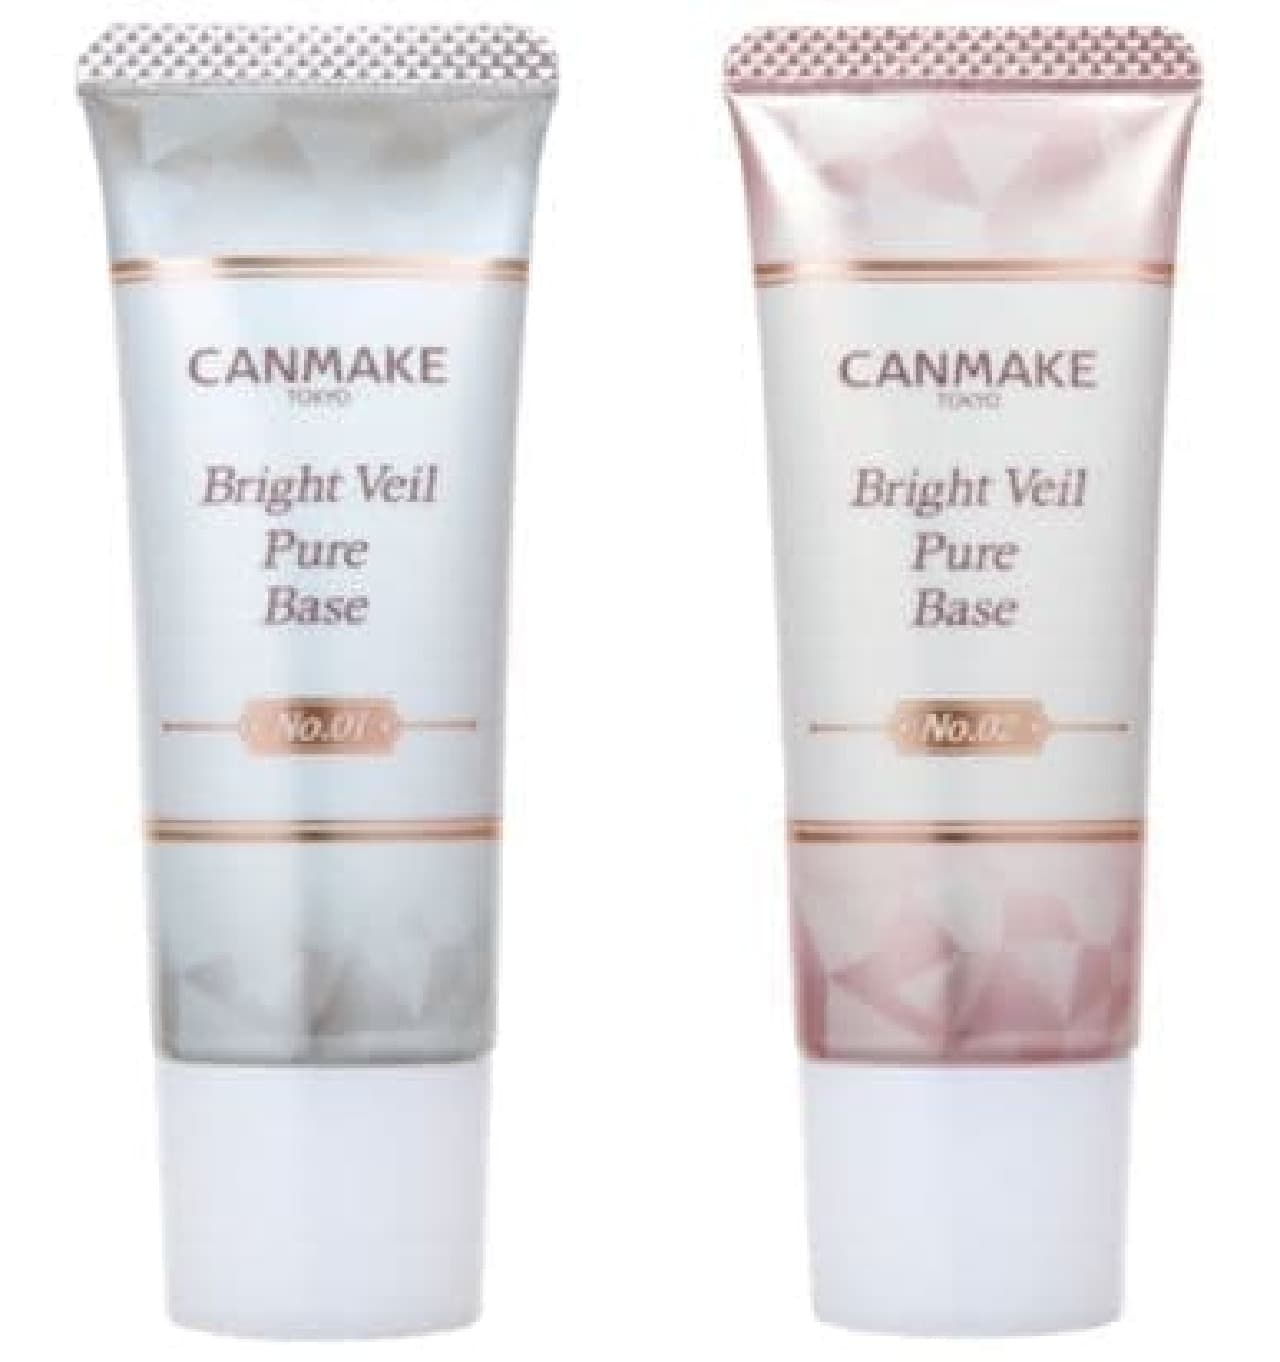 Canmake "Bright Veil Pure Base"